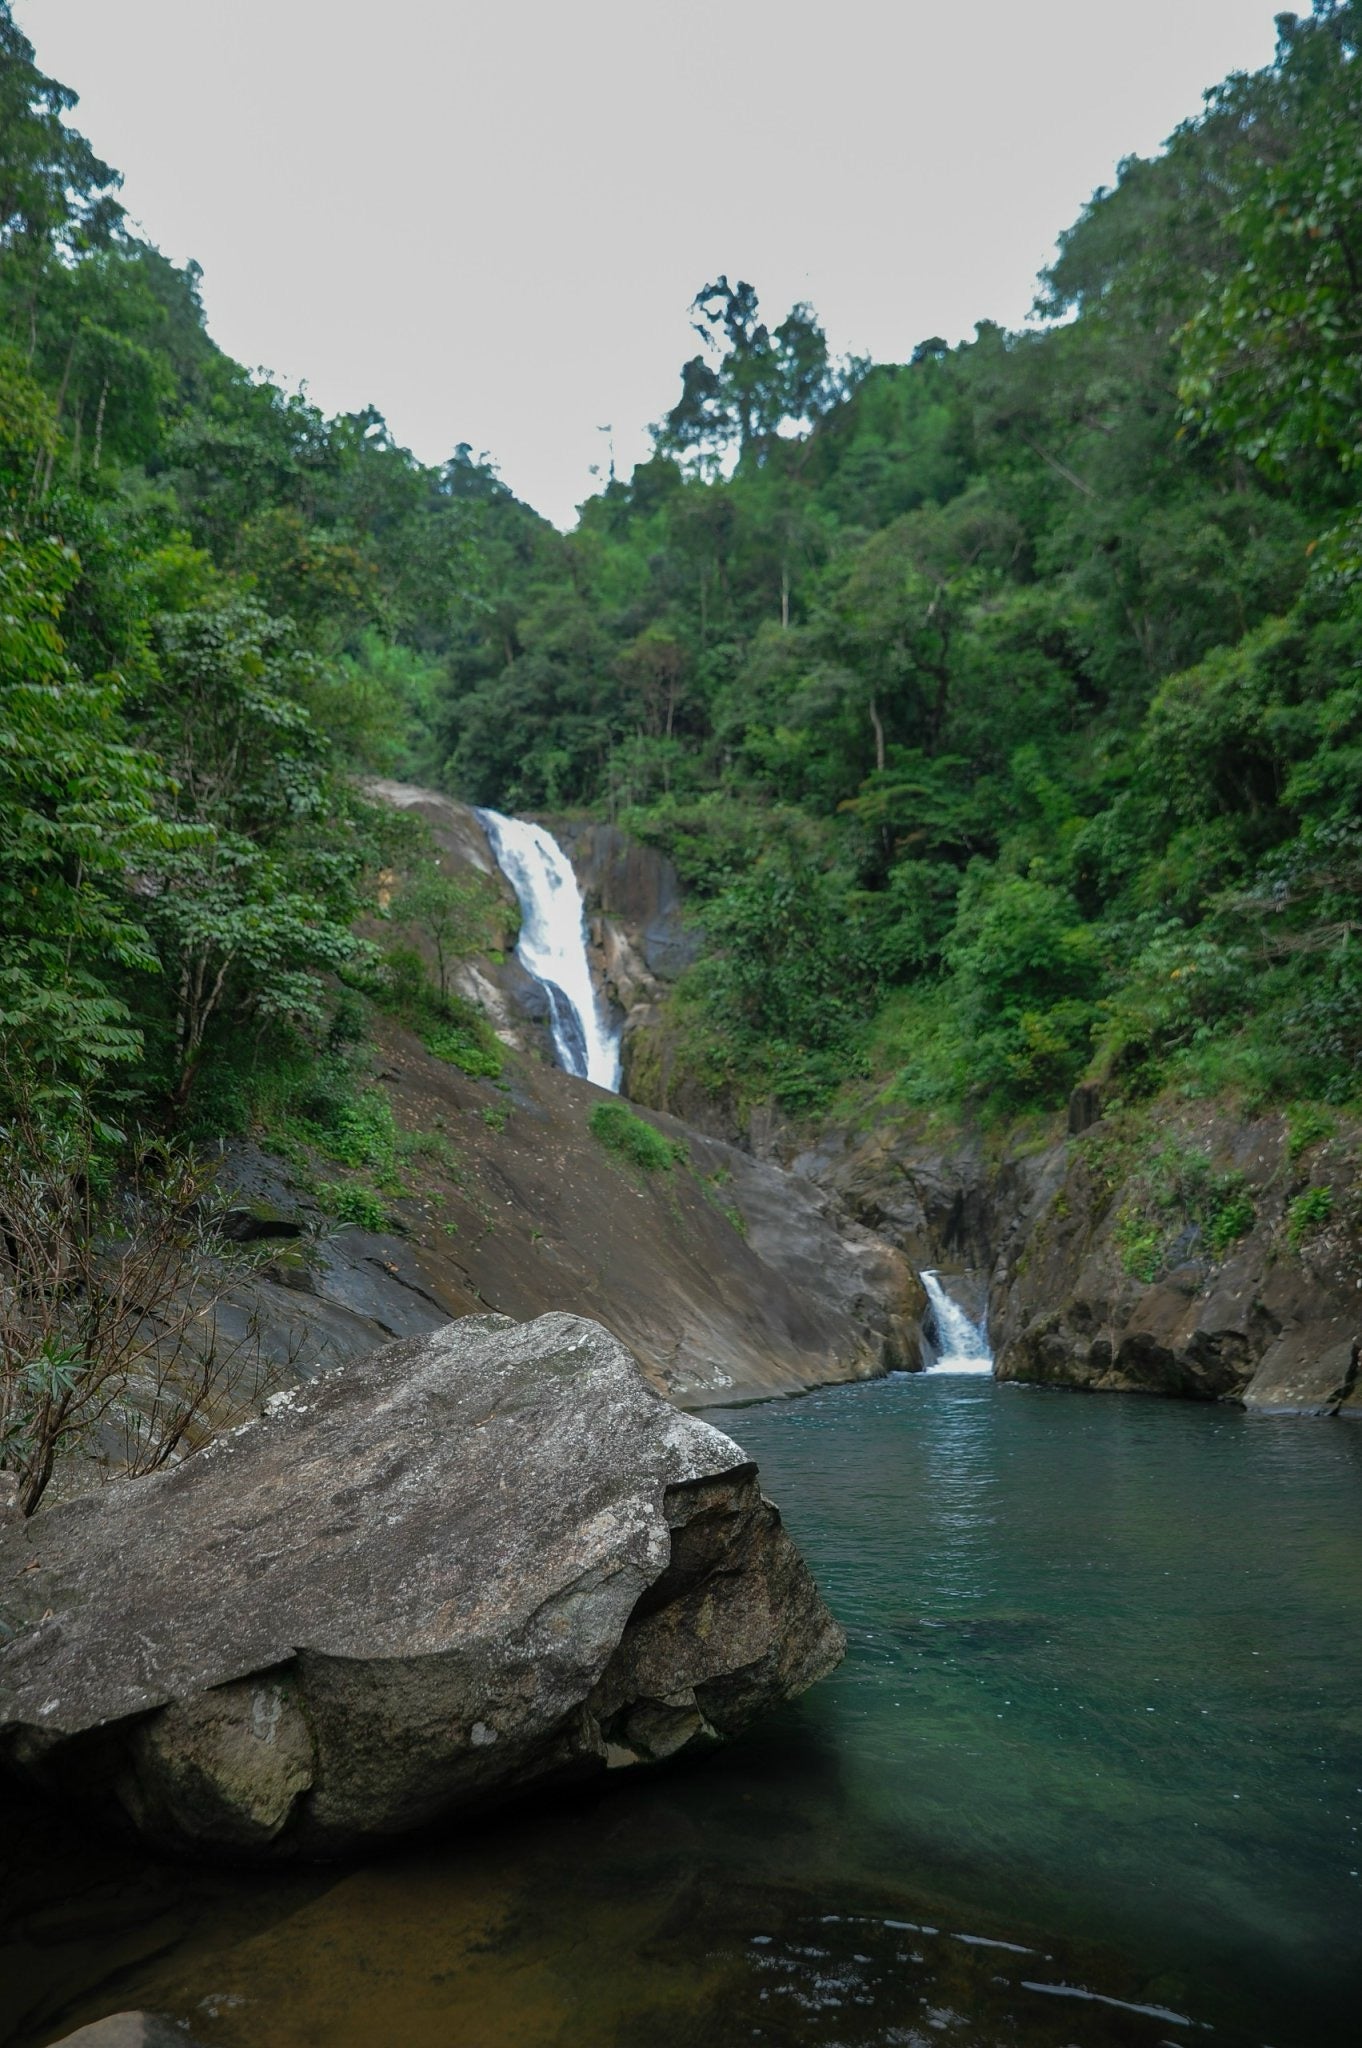 88A: Drizzling Rain Waterfall, Experience The Thrill Of Conquering The Wild